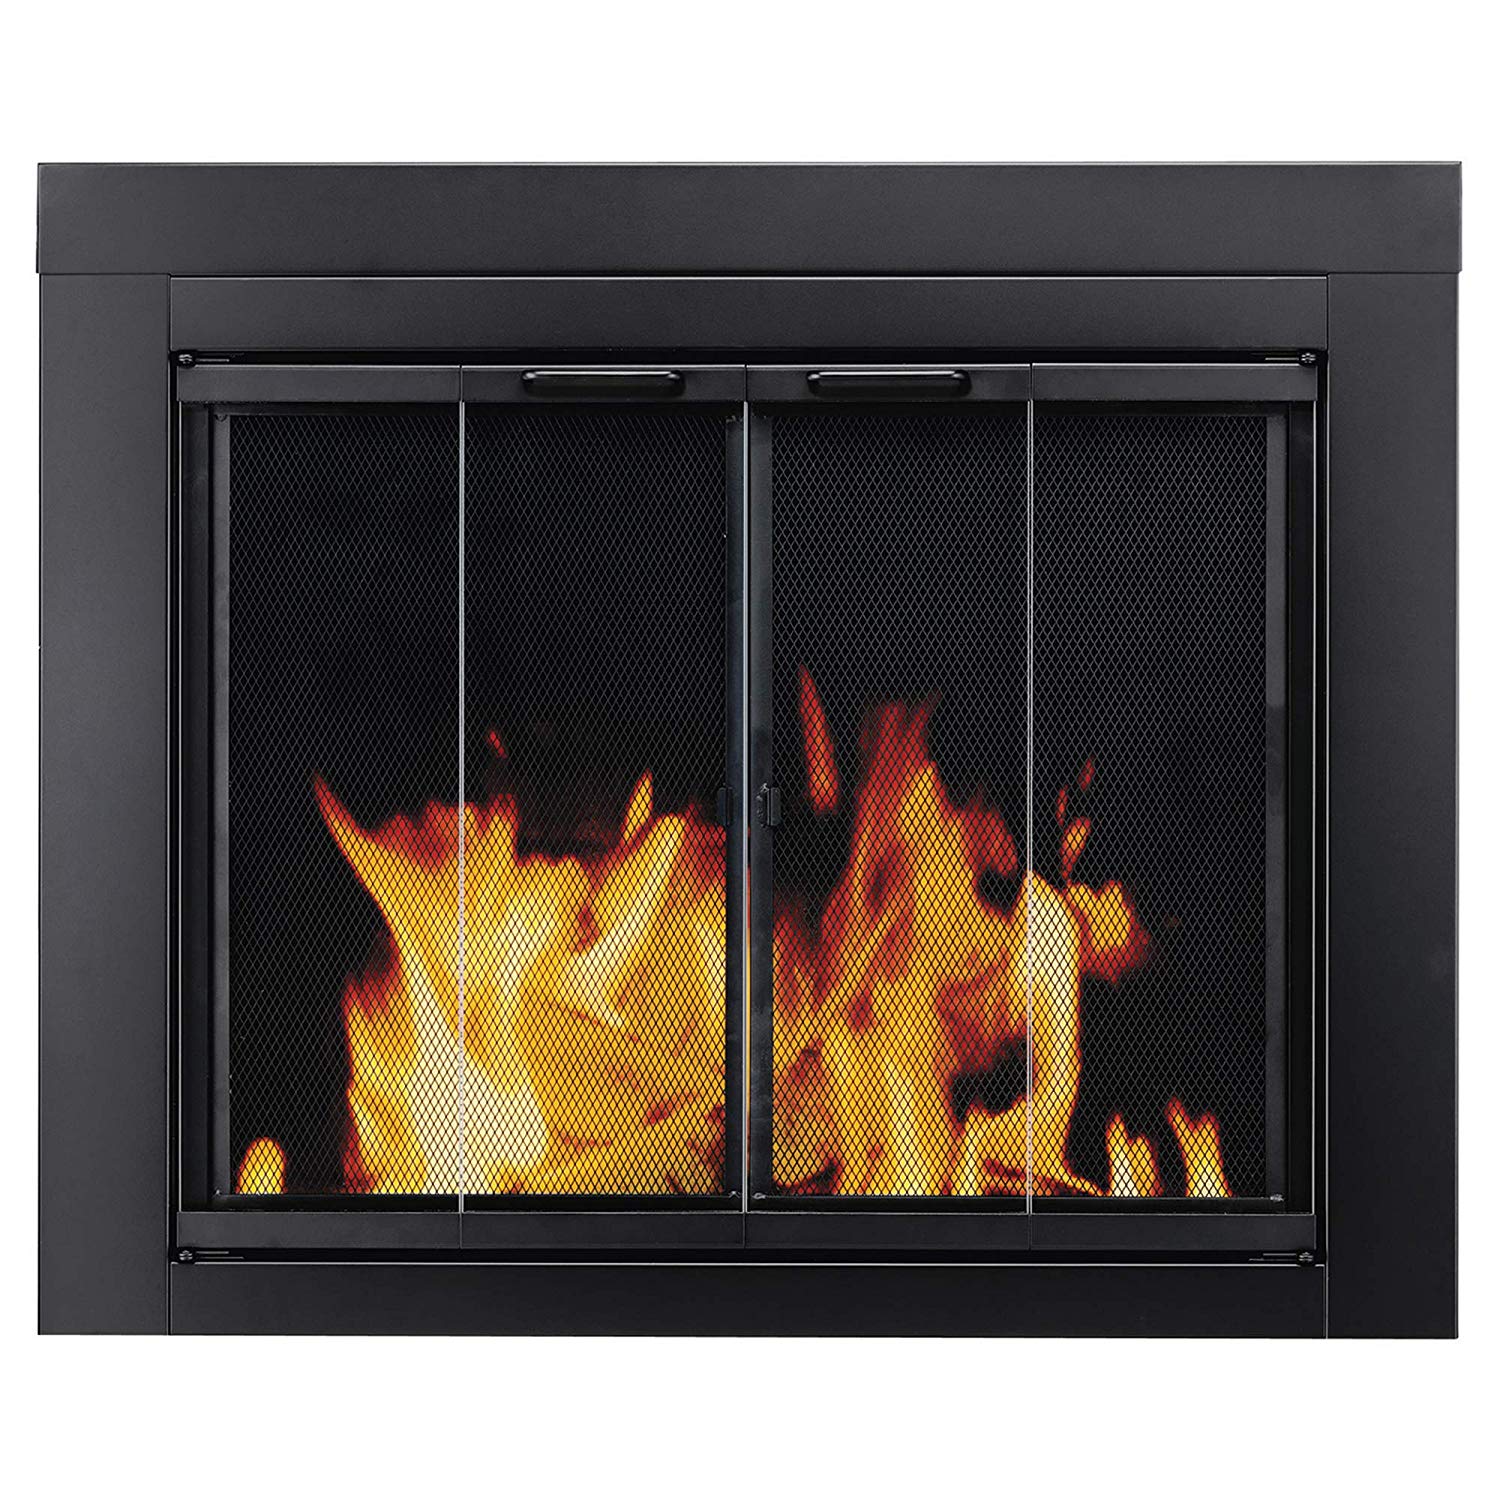 Gas Fireplace Smell New Pleasant Hearth at 1000 ascot Fireplace Glass Door Black Small